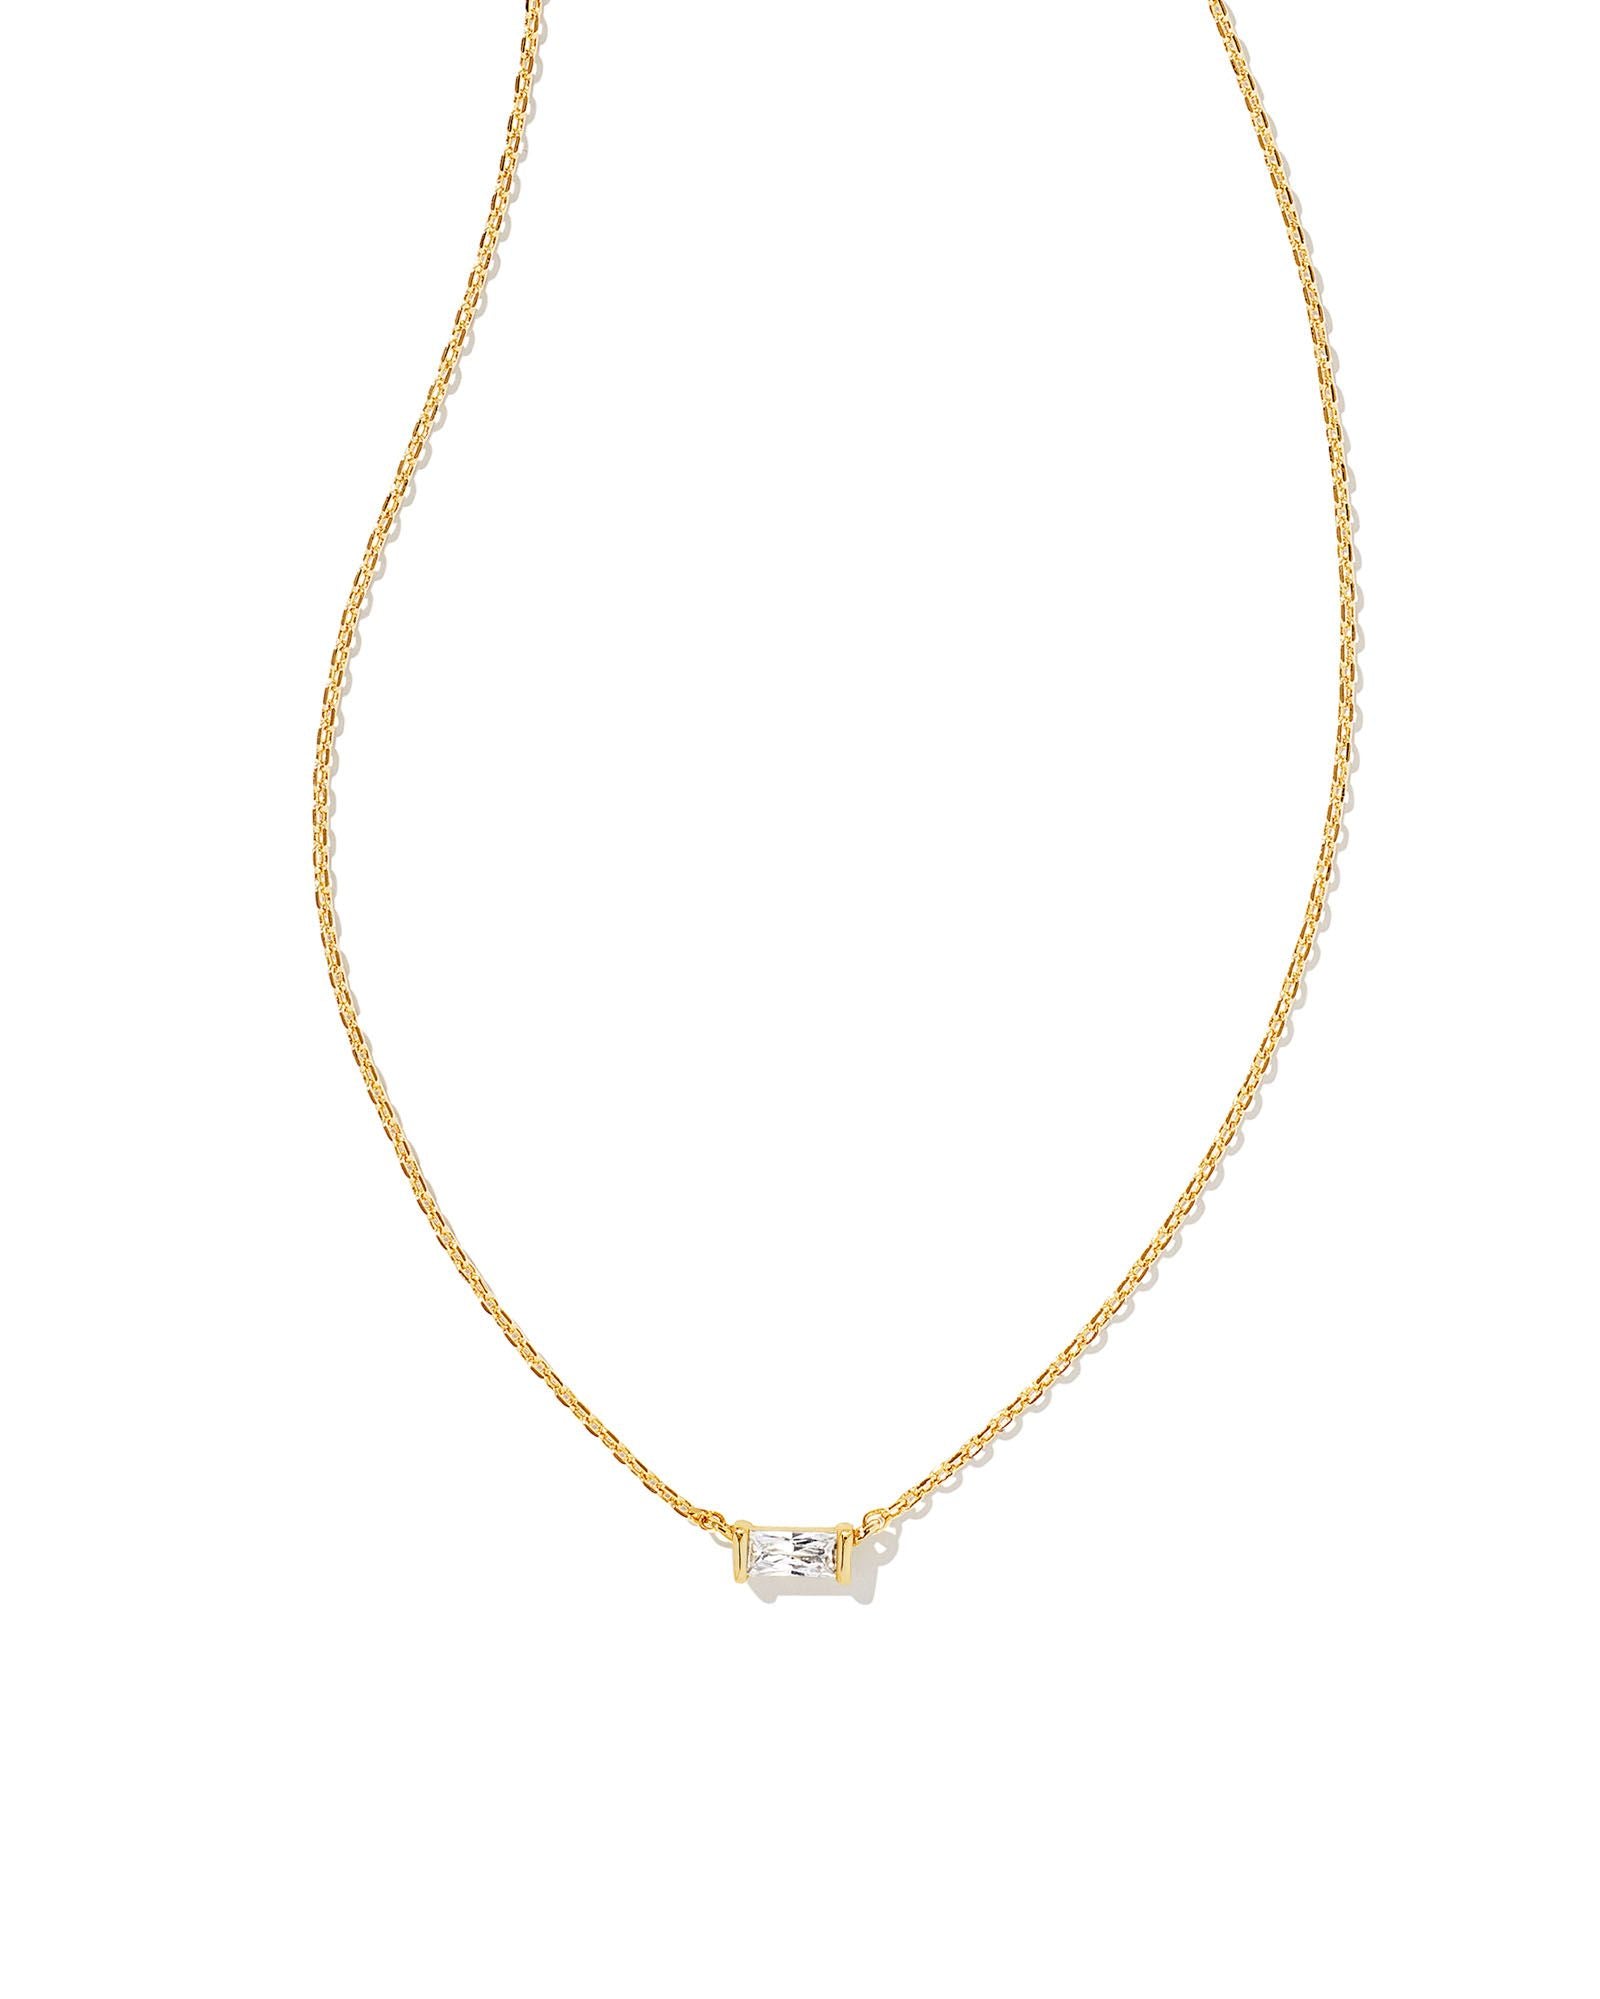 Juliette Pendant Necklace in Gold White Crystal